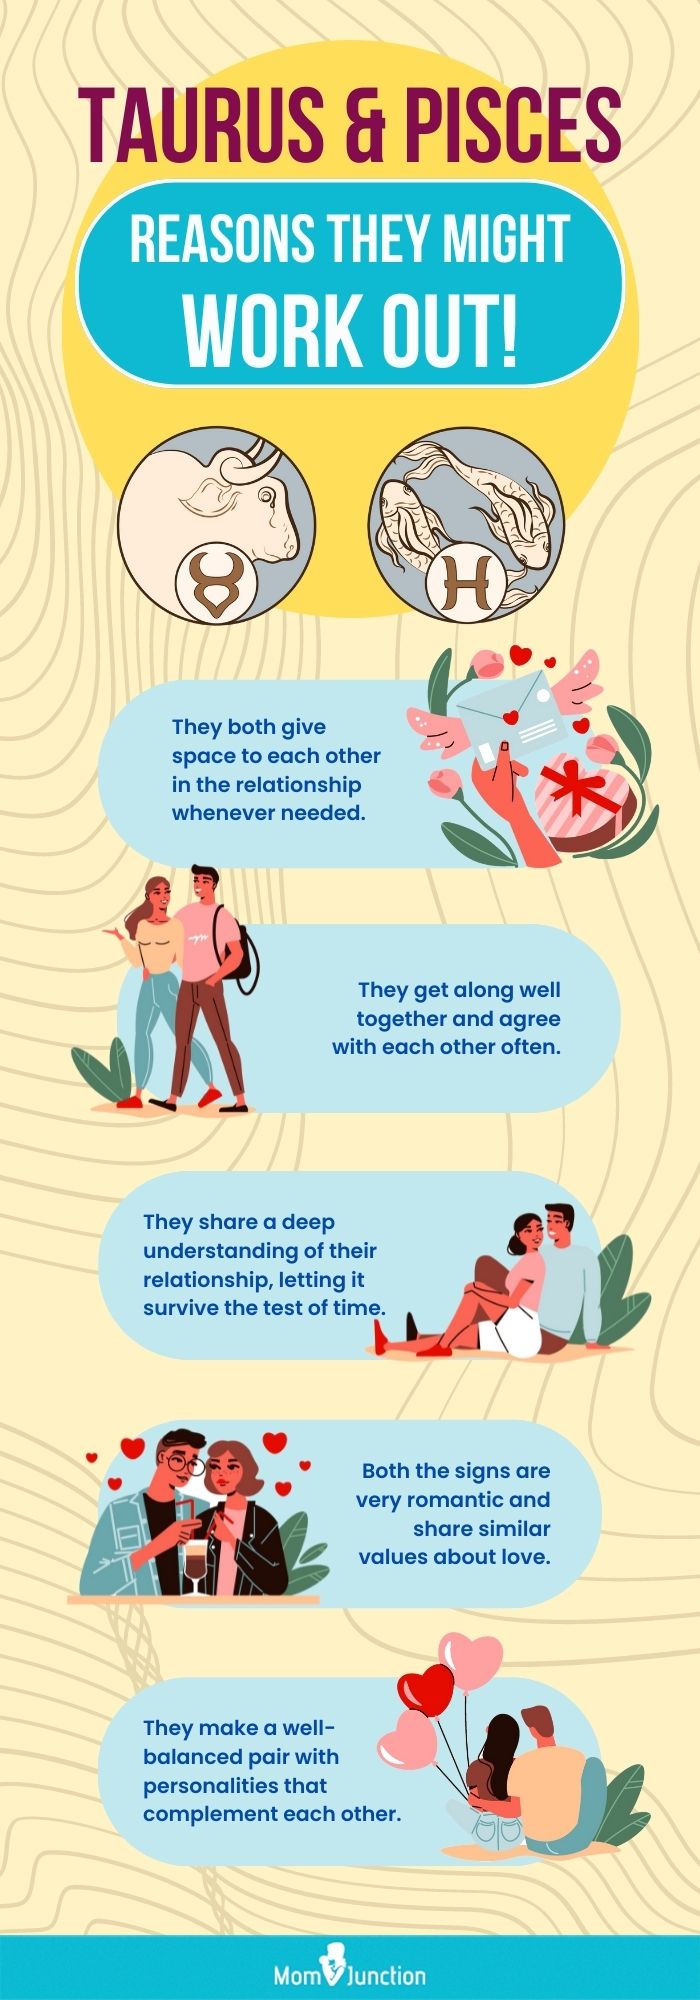 taurus and pisces reasons they might work out (infographic)